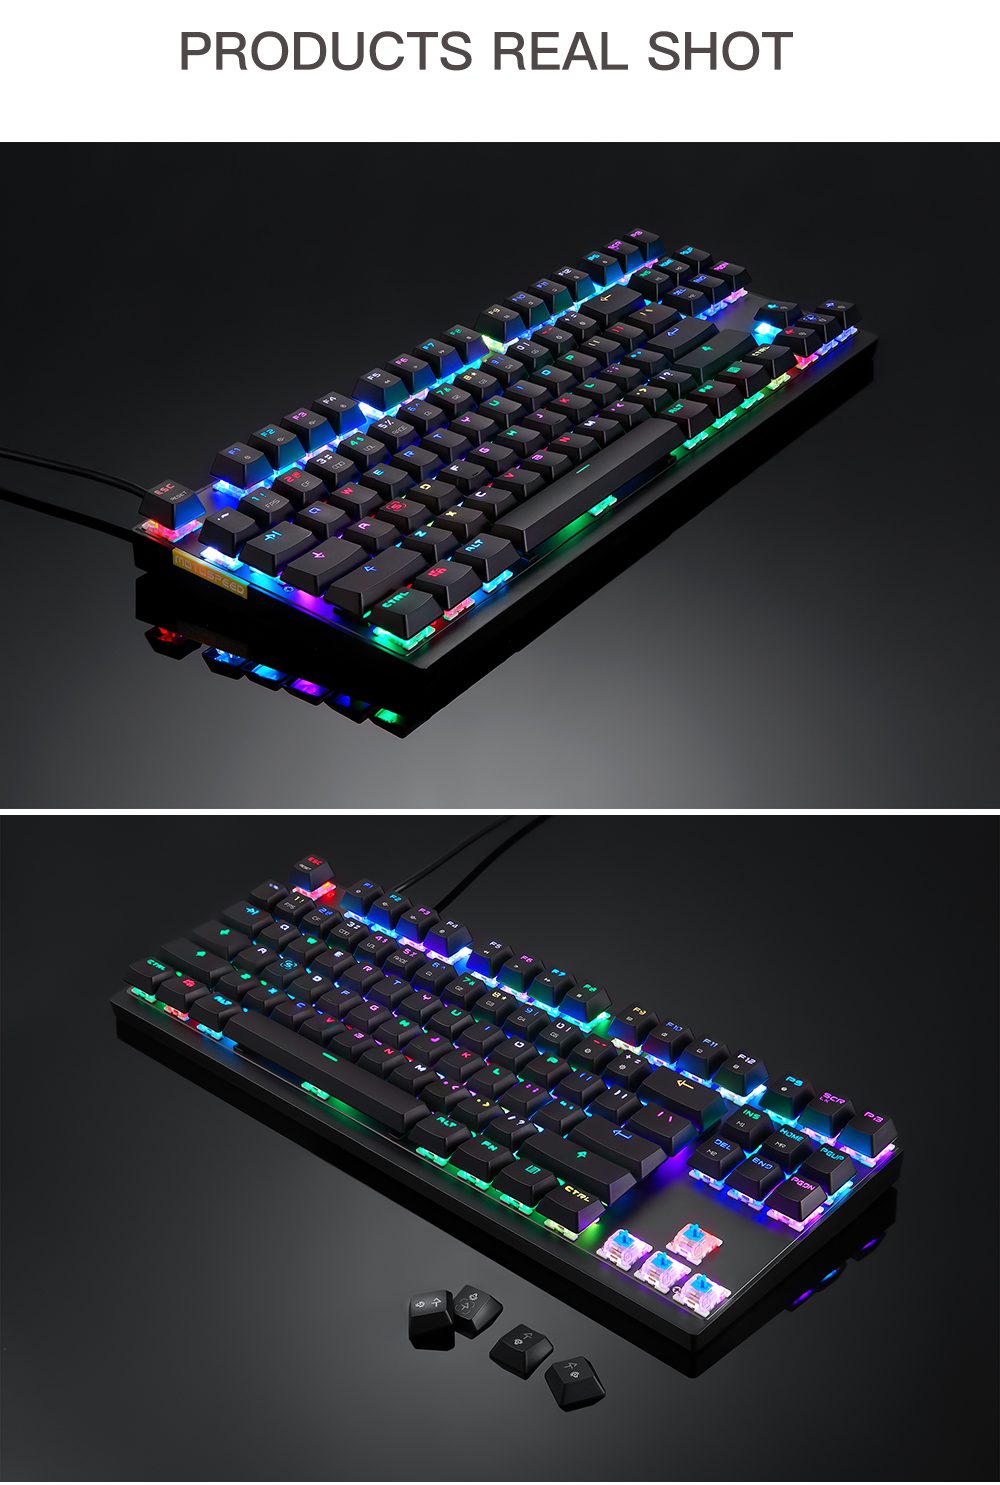 Motospeed CK82 Gaming Mechanical Keyboard RGB Backlight USB Wired 87 Key Red Blue Switch Keypads Anti-Ghosting For PC Laptop